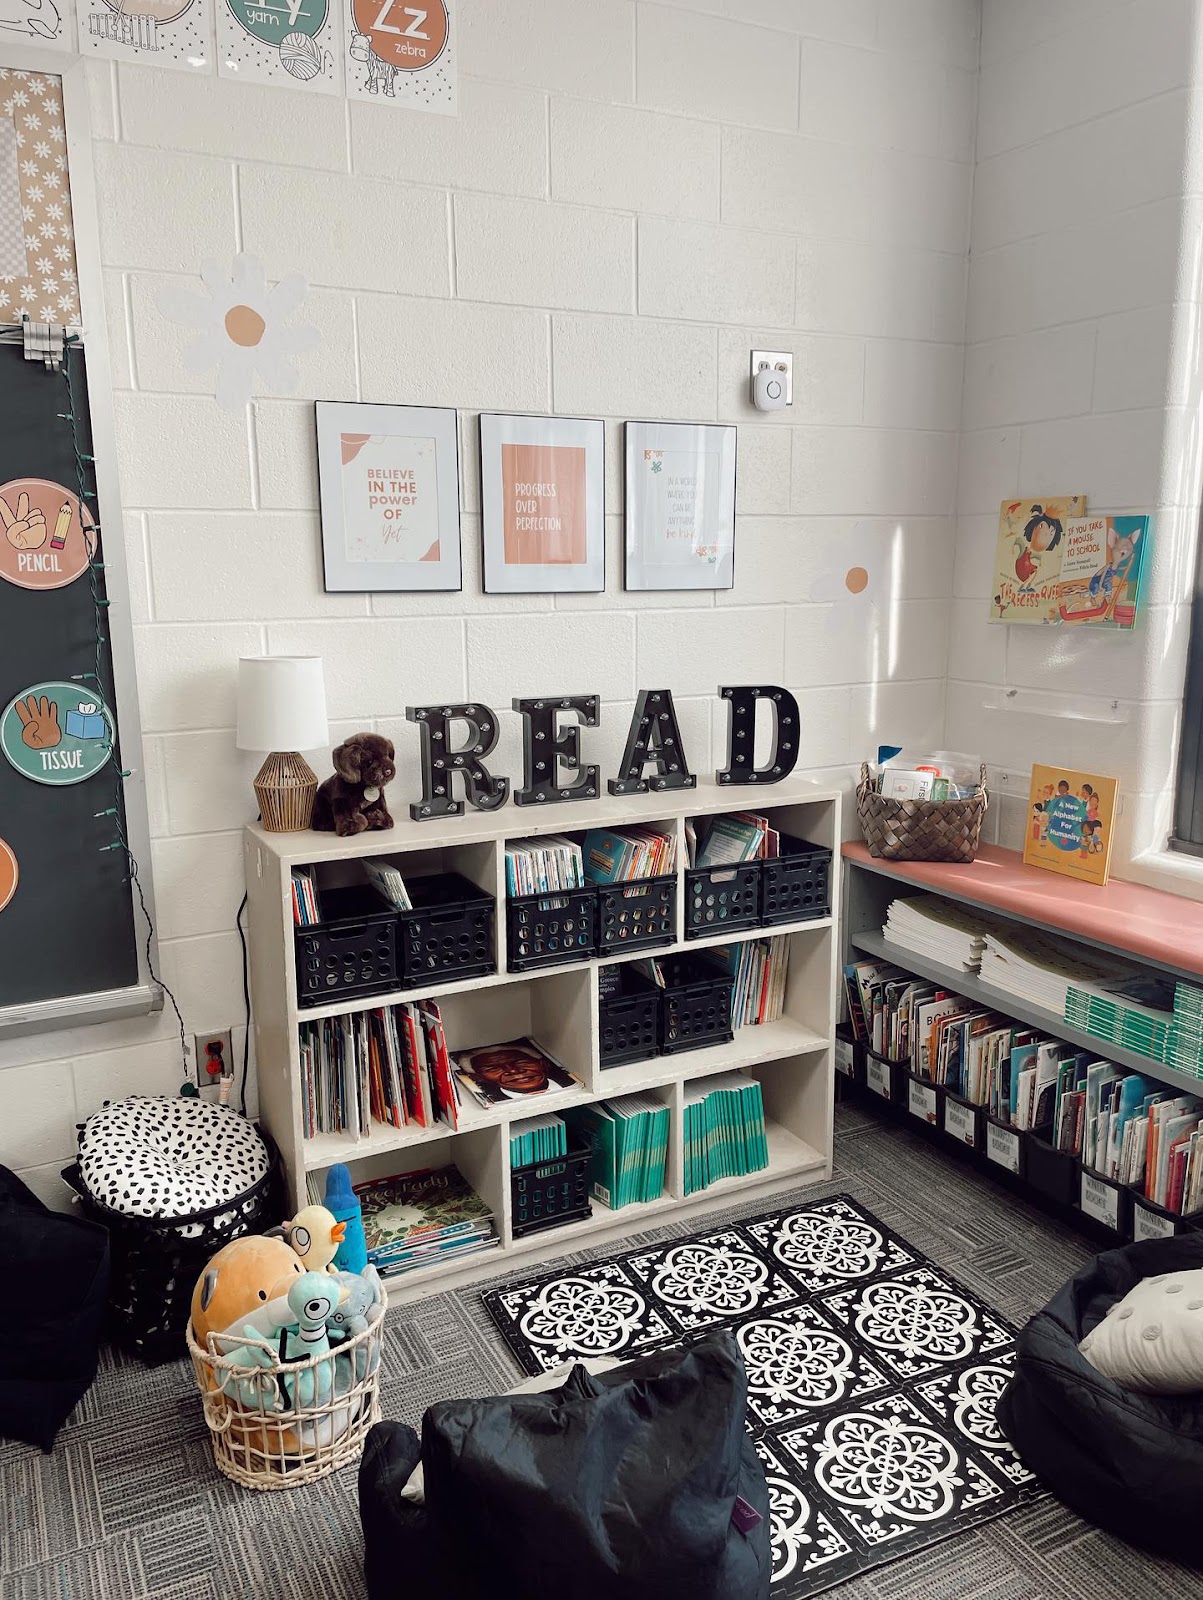 This image shows a reading nook with a bookshelf, bean bag chairs, a rug, and a basket filled with stuffed animals. 